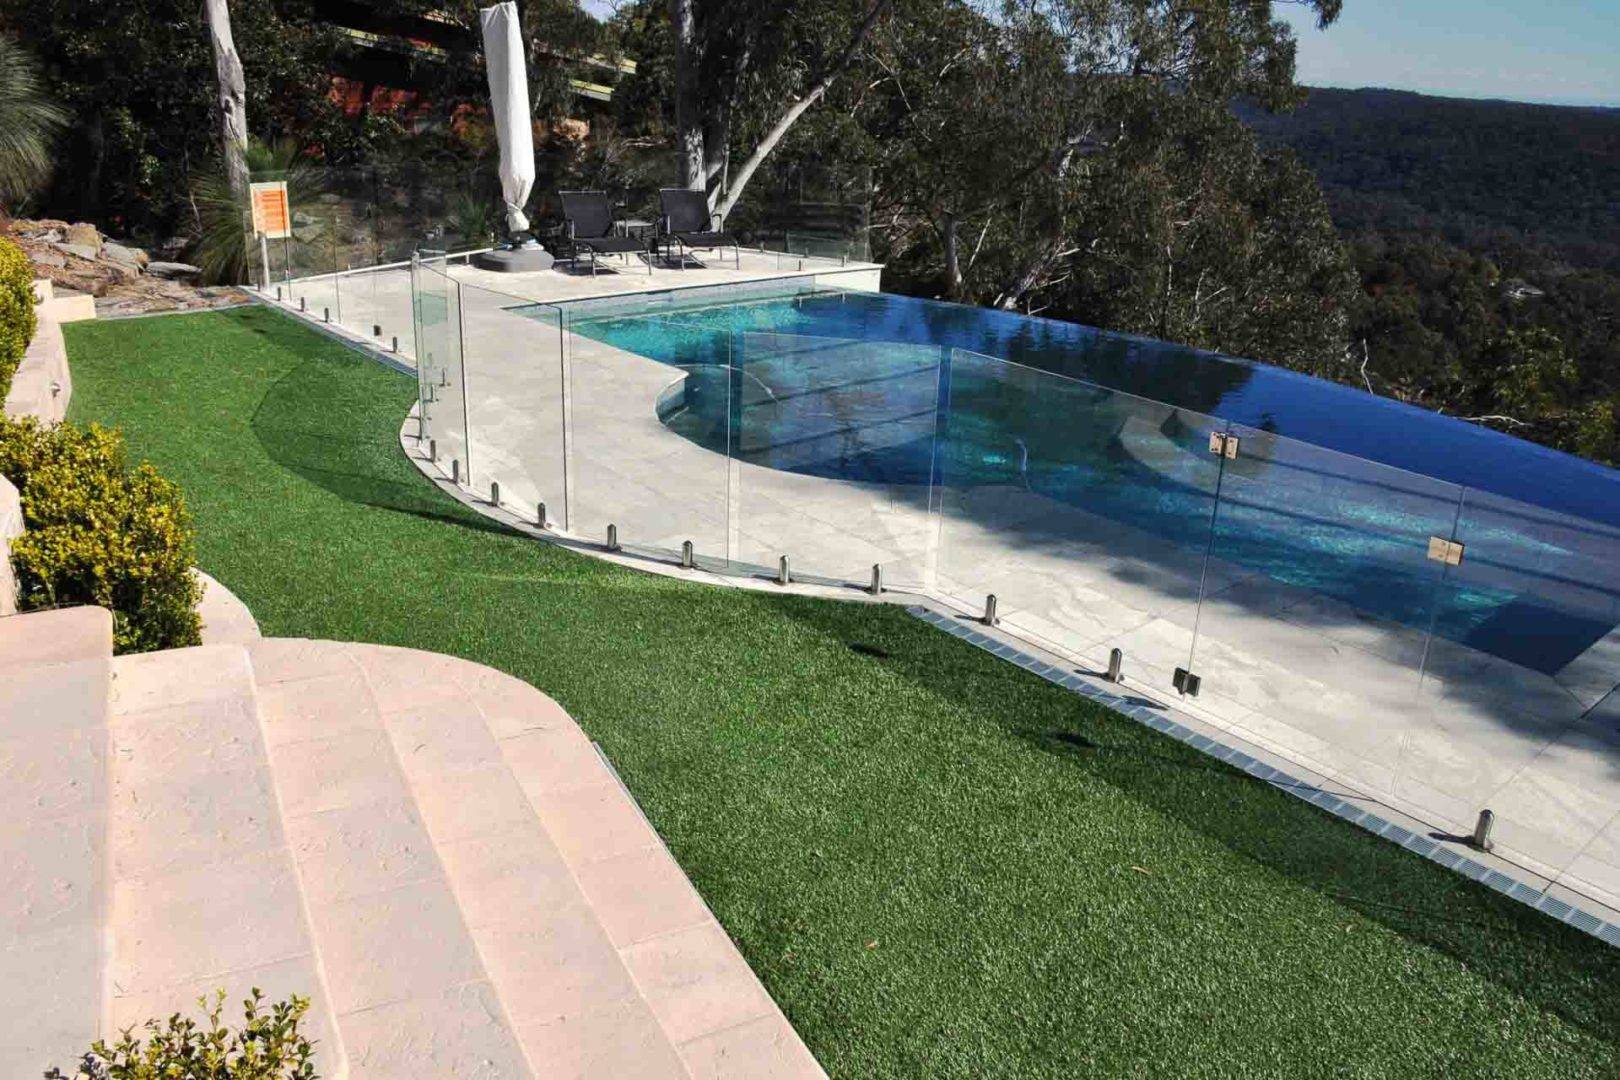 Save money in style with artificial grass - A bush land paradise, Australian Outdoor Living.